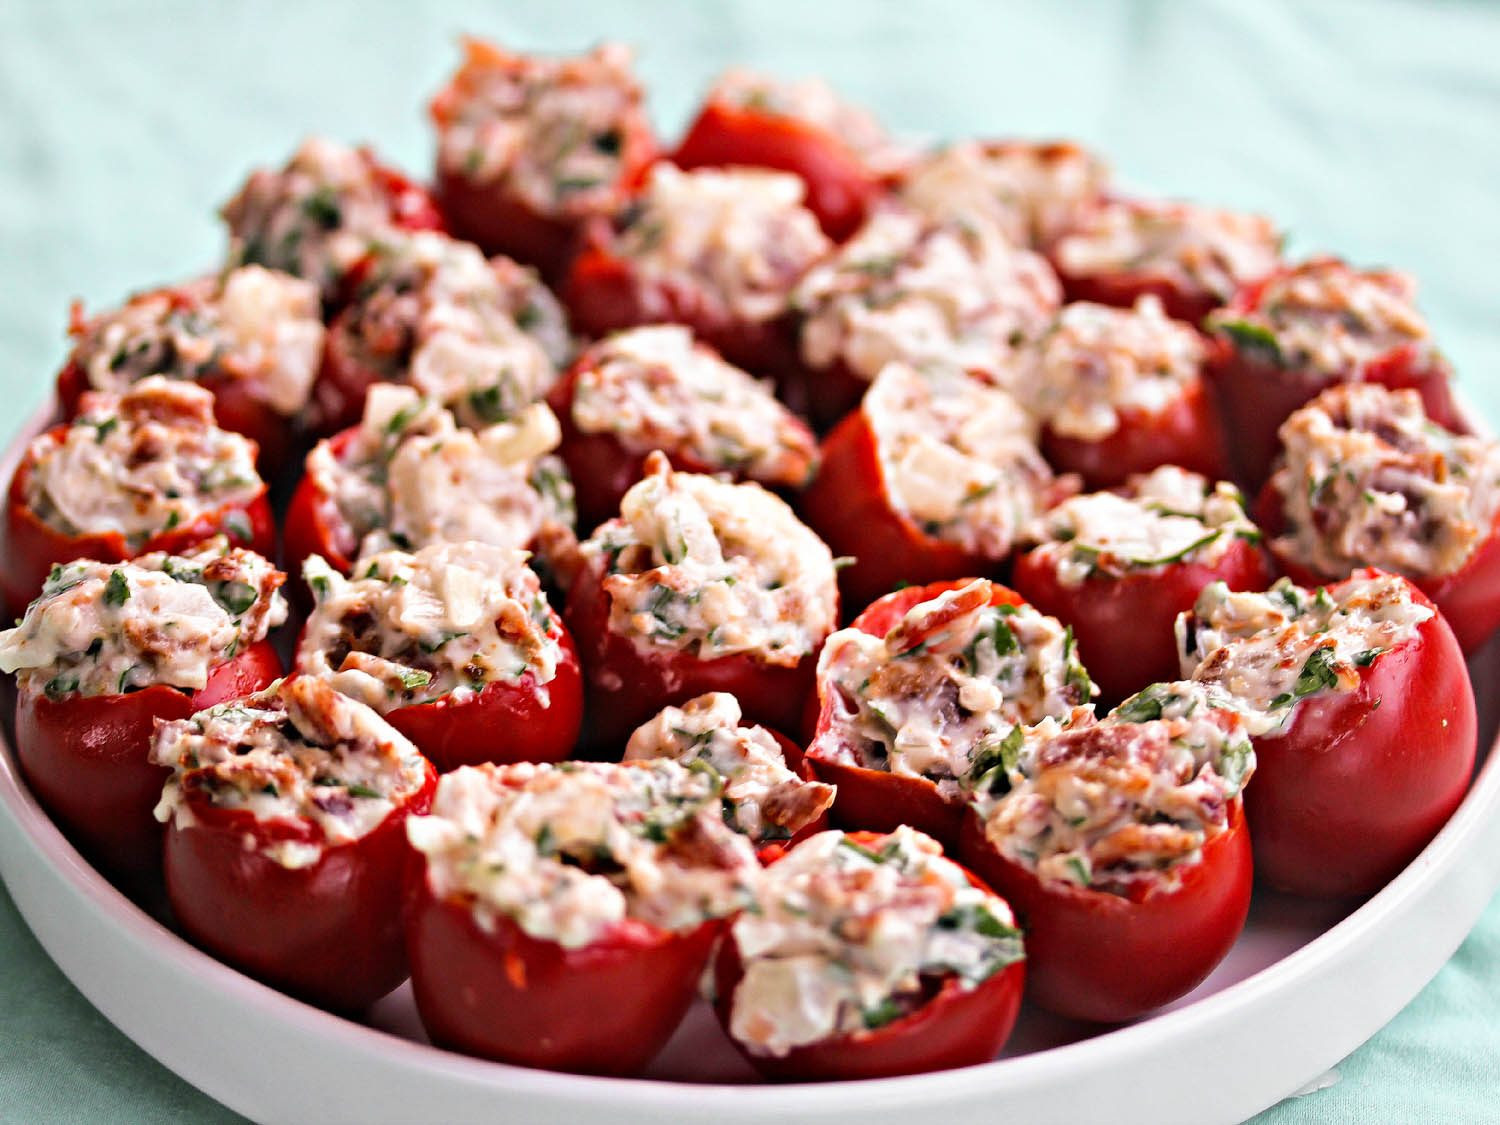 Cherry Tomato Appetizers Recipes
 Stuffed Cherry Tomatoes With Bacon Parmesan and Parsley